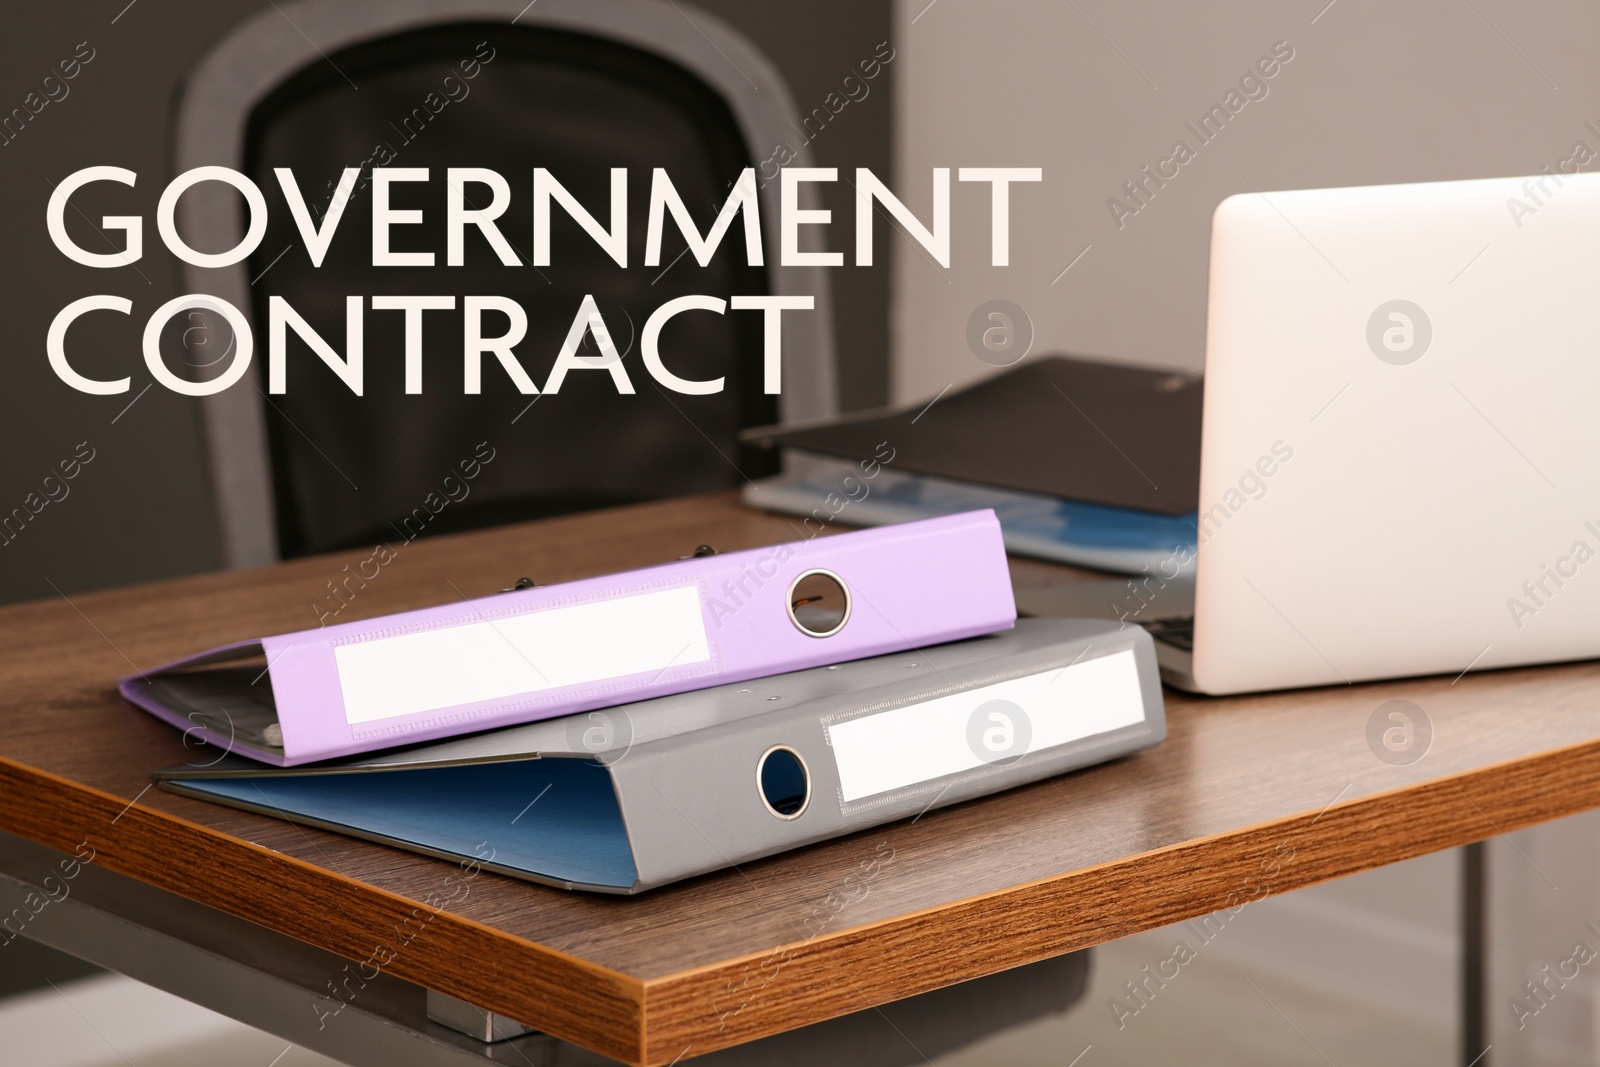 Image of Government contract. File folders and laptop on wooden table in office